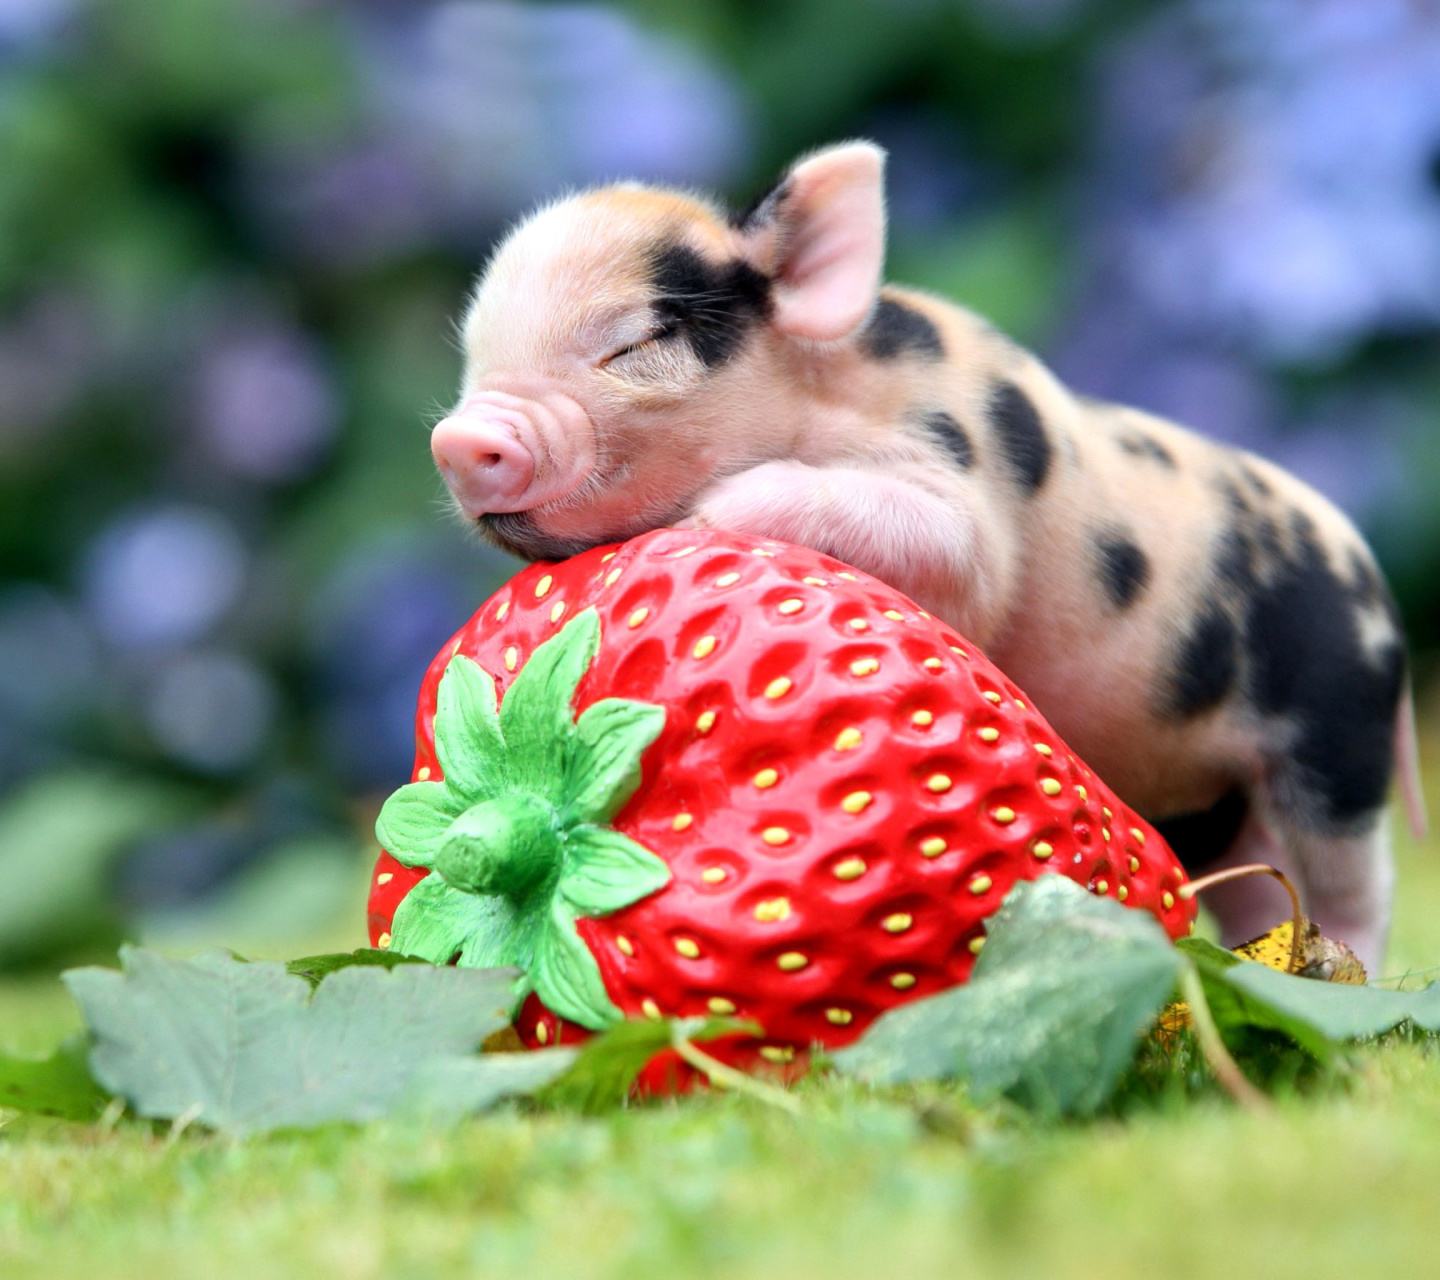 Pig and Strawberry wallpaper 1440x1280